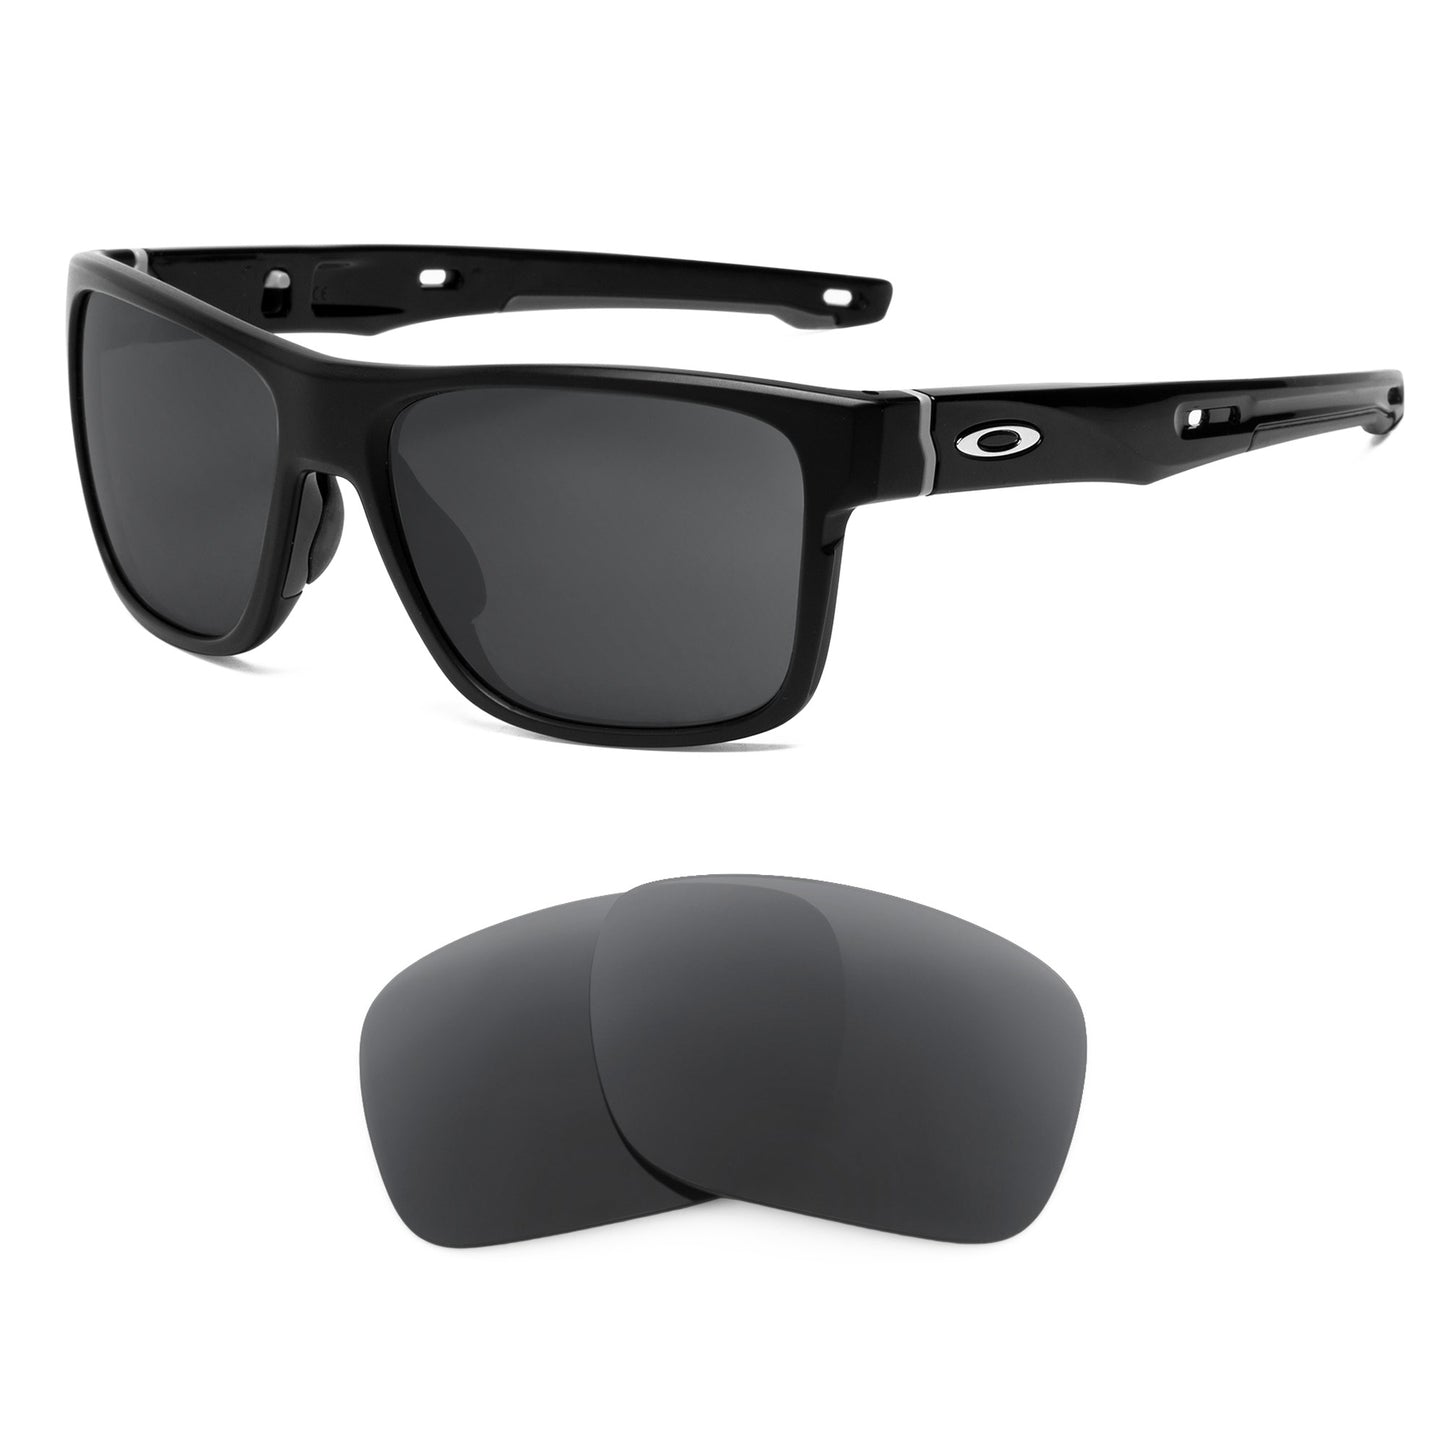 Oakley Crossrange sunglasses with replacement lenses